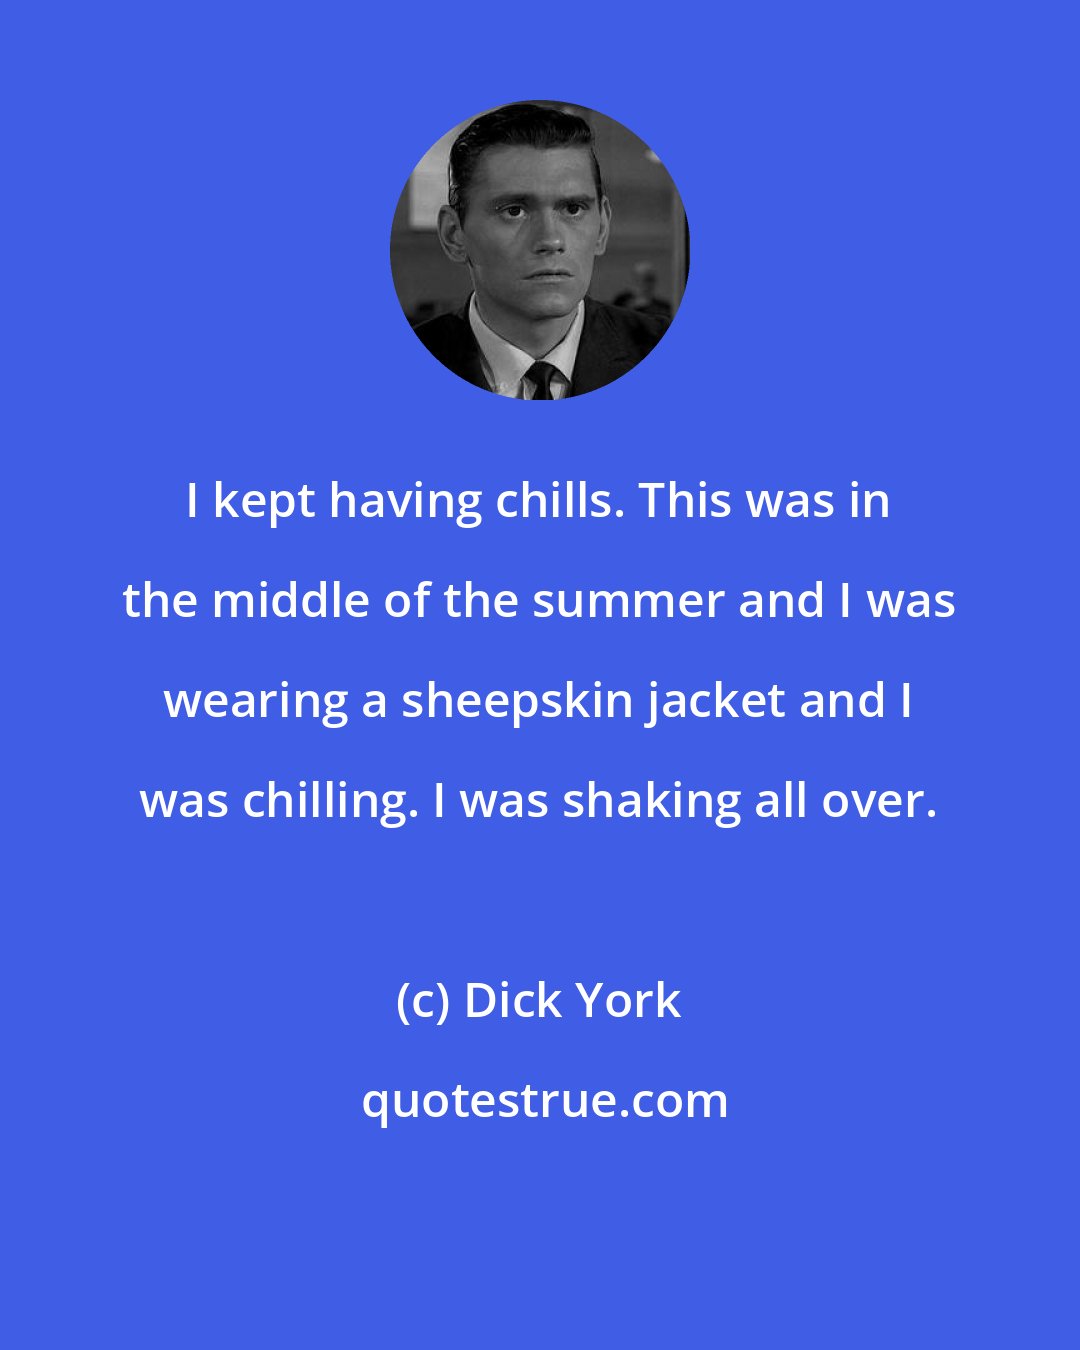 Dick York: I kept having chills. This was in the middle of the summer and I was wearing a sheepskin jacket and I was chilling. I was shaking all over.